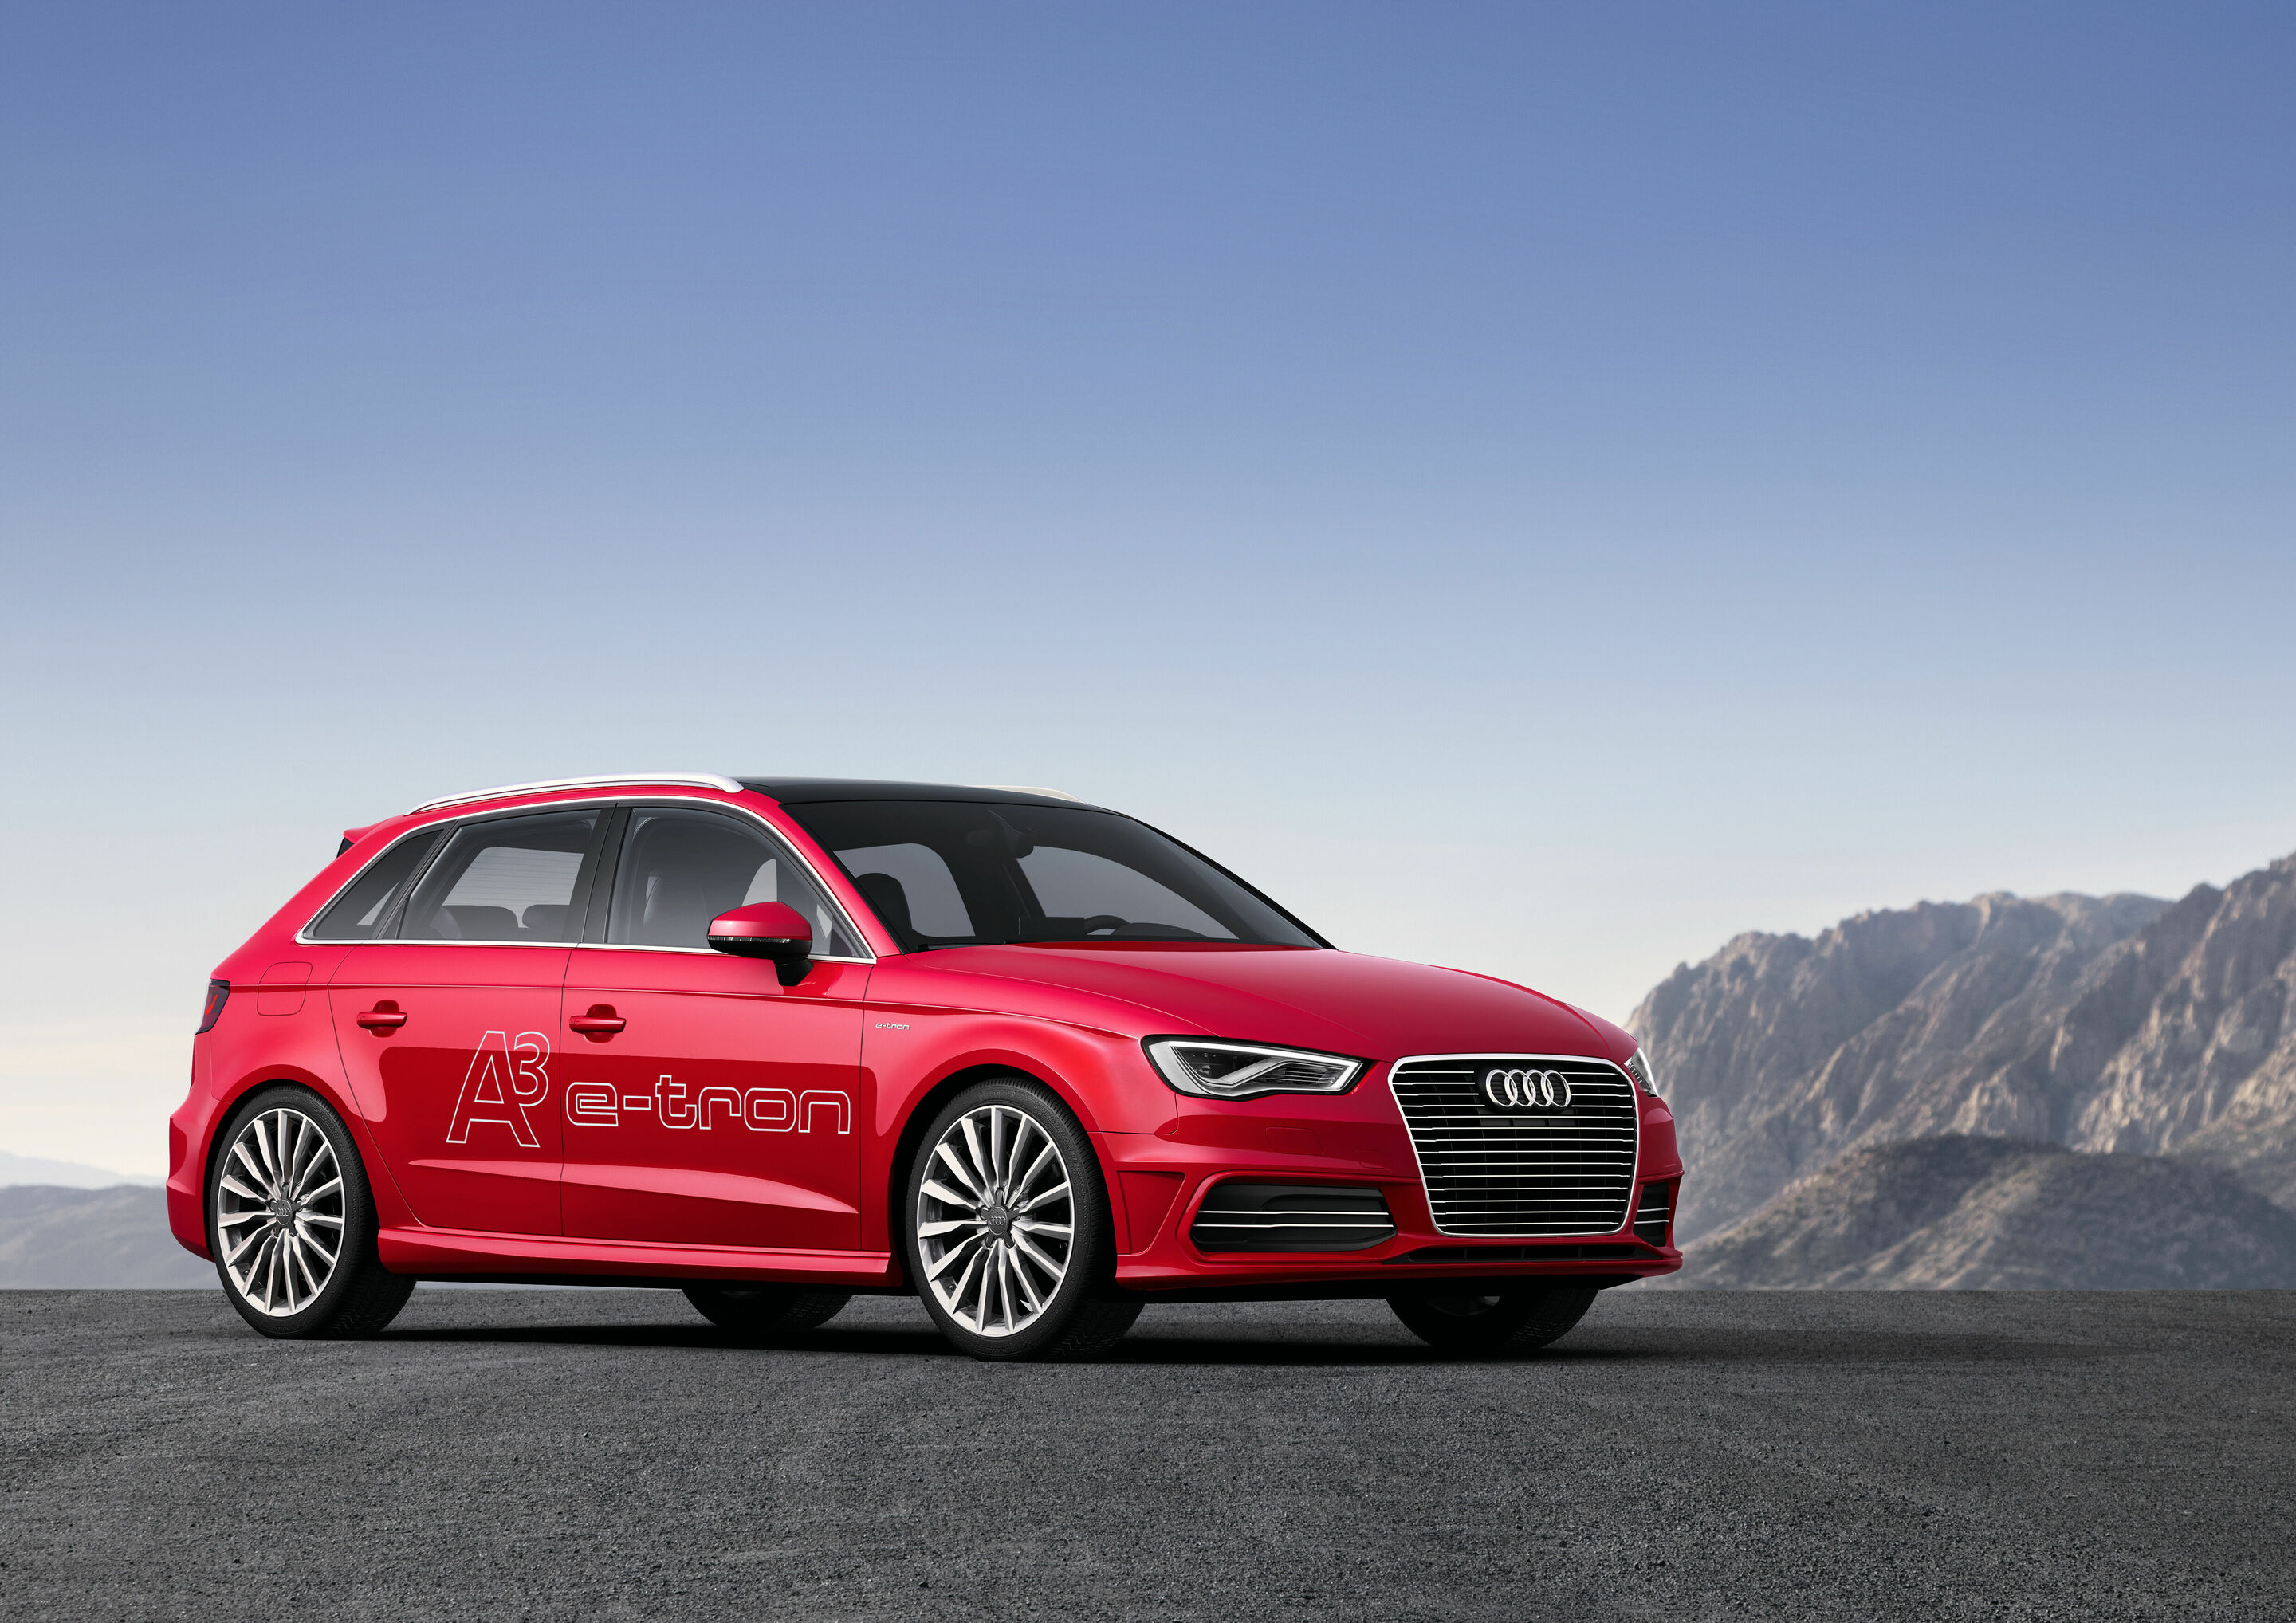 Audi launches A3 Sportback plug-in hybrid - car and motoring news by